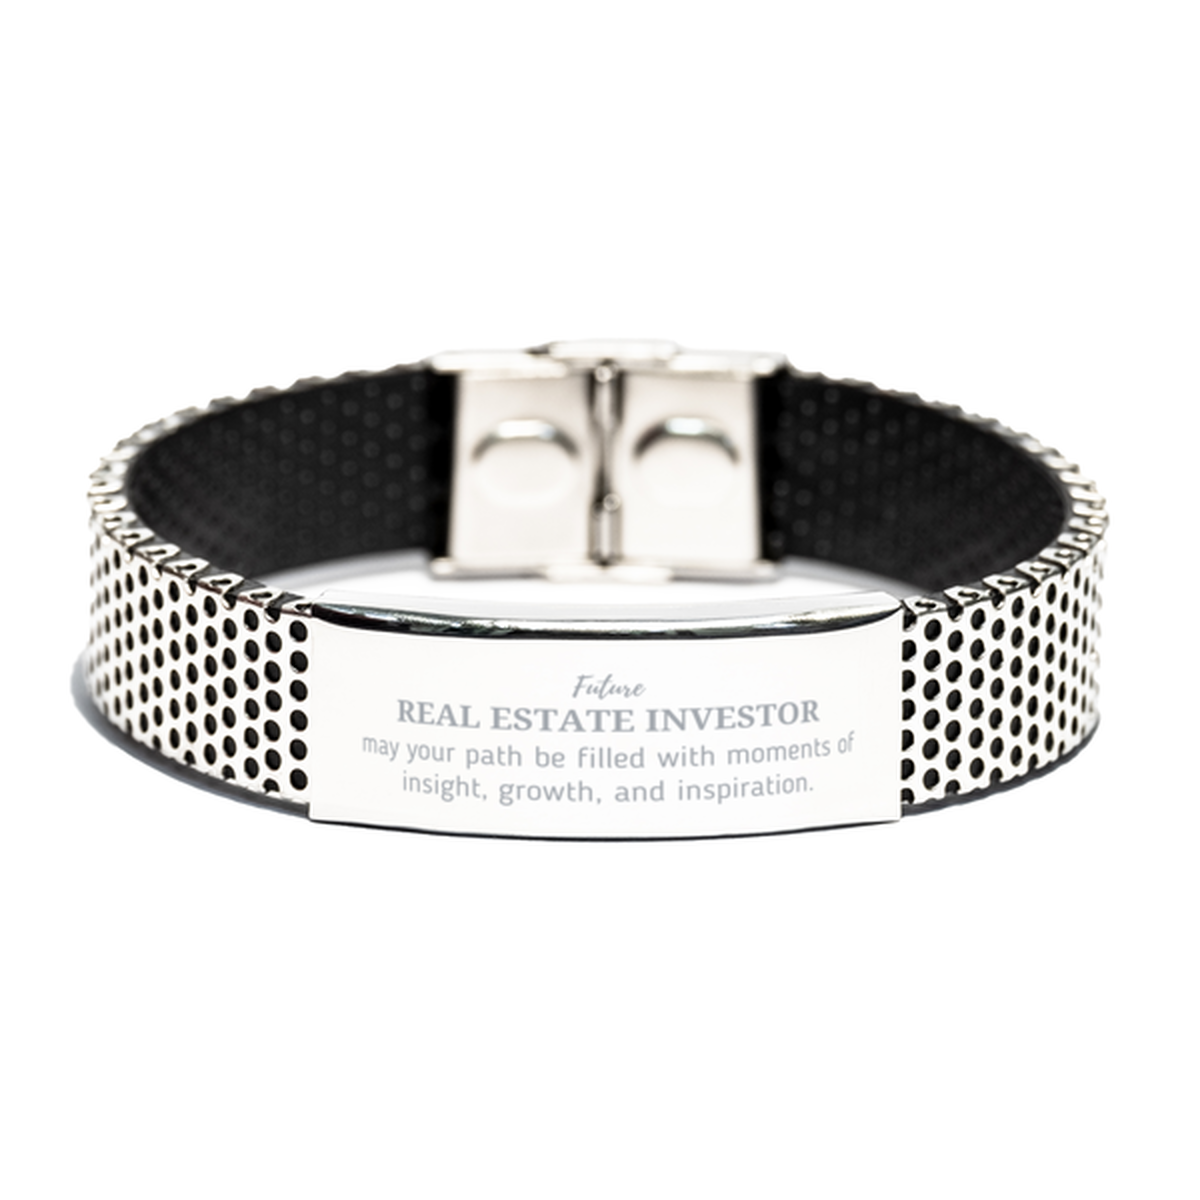 Future Real Estate Investor Gifts, May your path be filled with moments of insight, Graduation Gifts for New Real Estate Investor, Christmas Unique Stainless Steel Bracelet For Men, Women, Friends